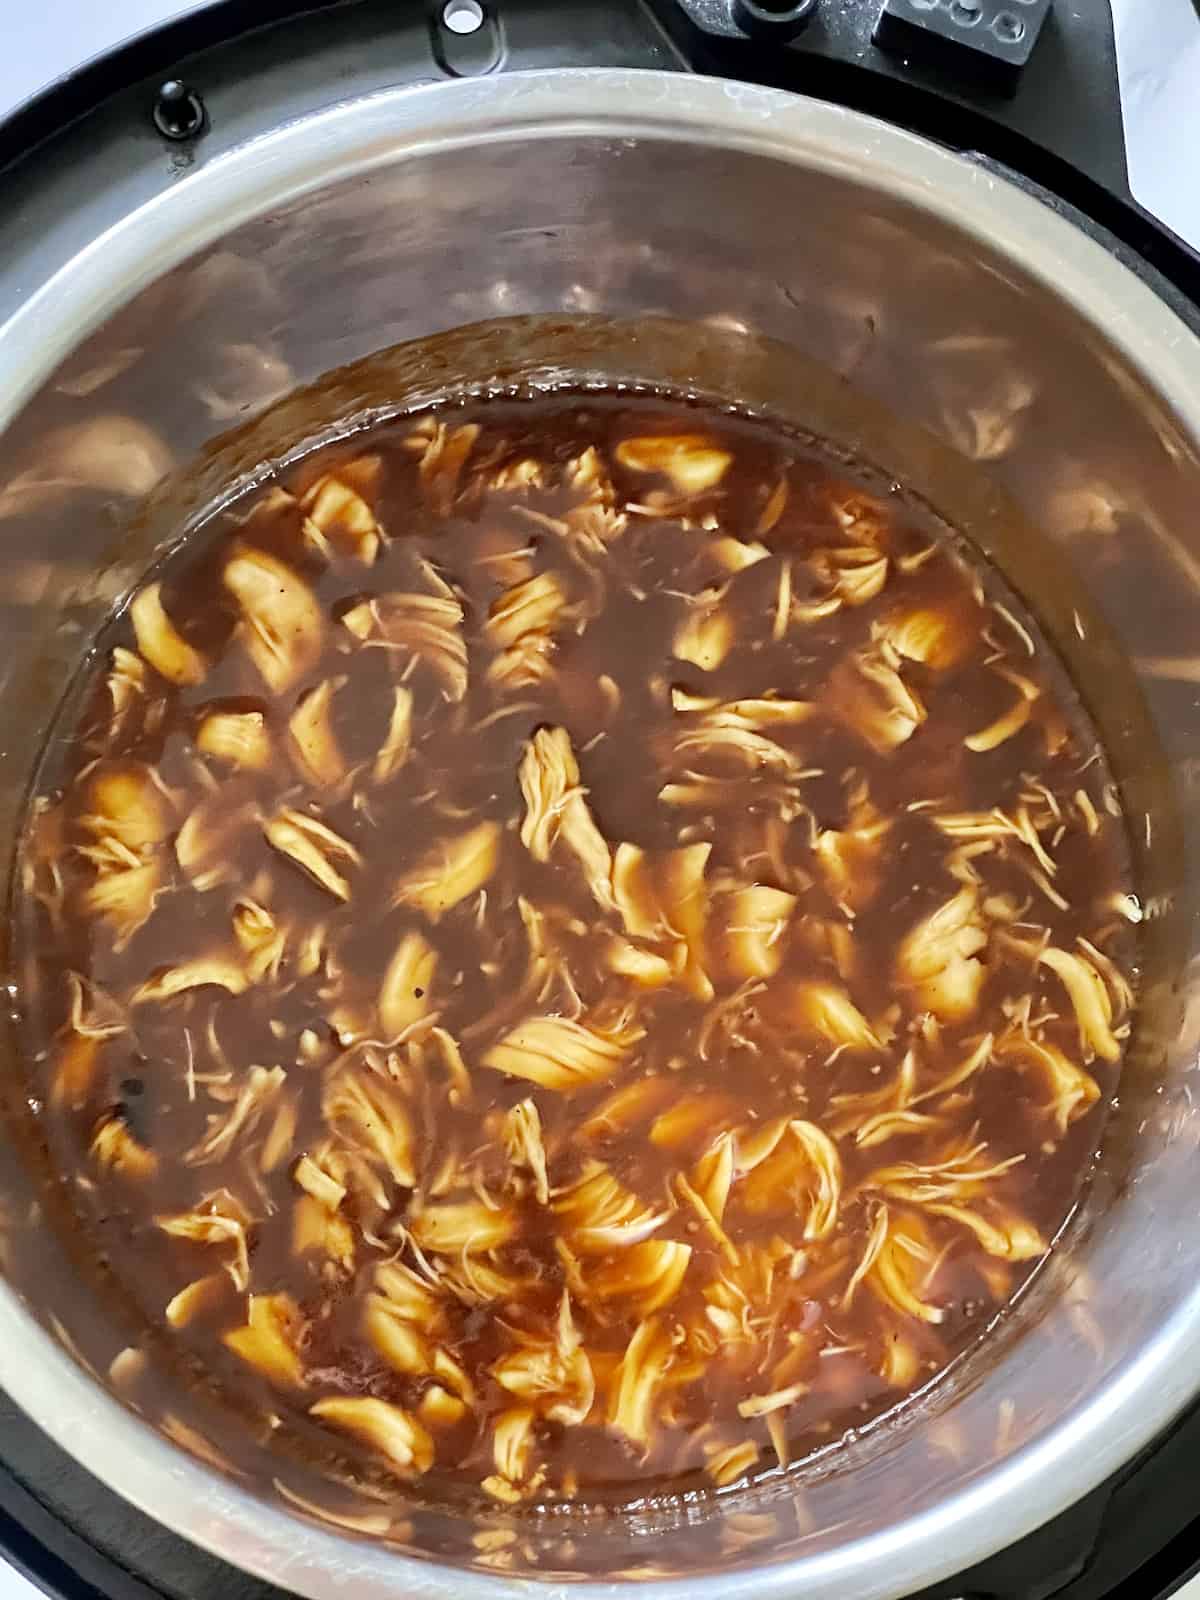 shredded barbecue chicken in a pressure cooker